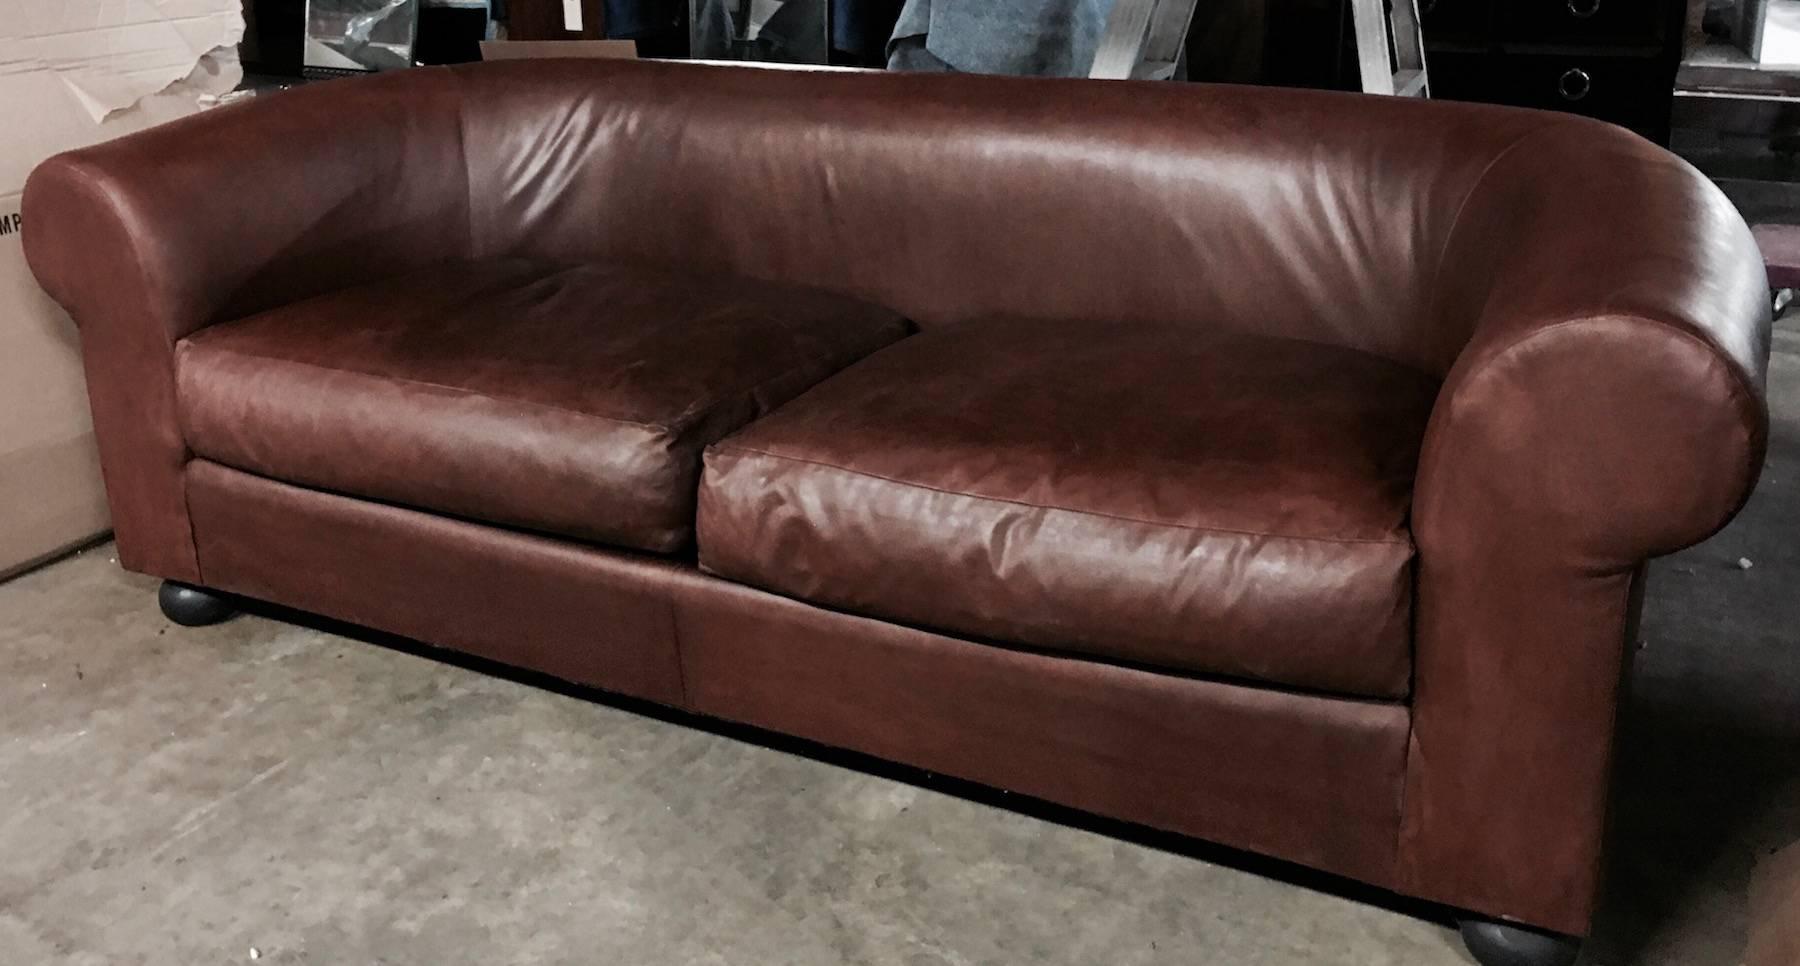 Large Ralph Lauren brown leather modern Chesterfield sofa, with rolled arms
sleek unstuffed sofa with two large seat cushions raised on four ebonized bun legs. A solid choice for the living room, library, large bedroom or any room in your house